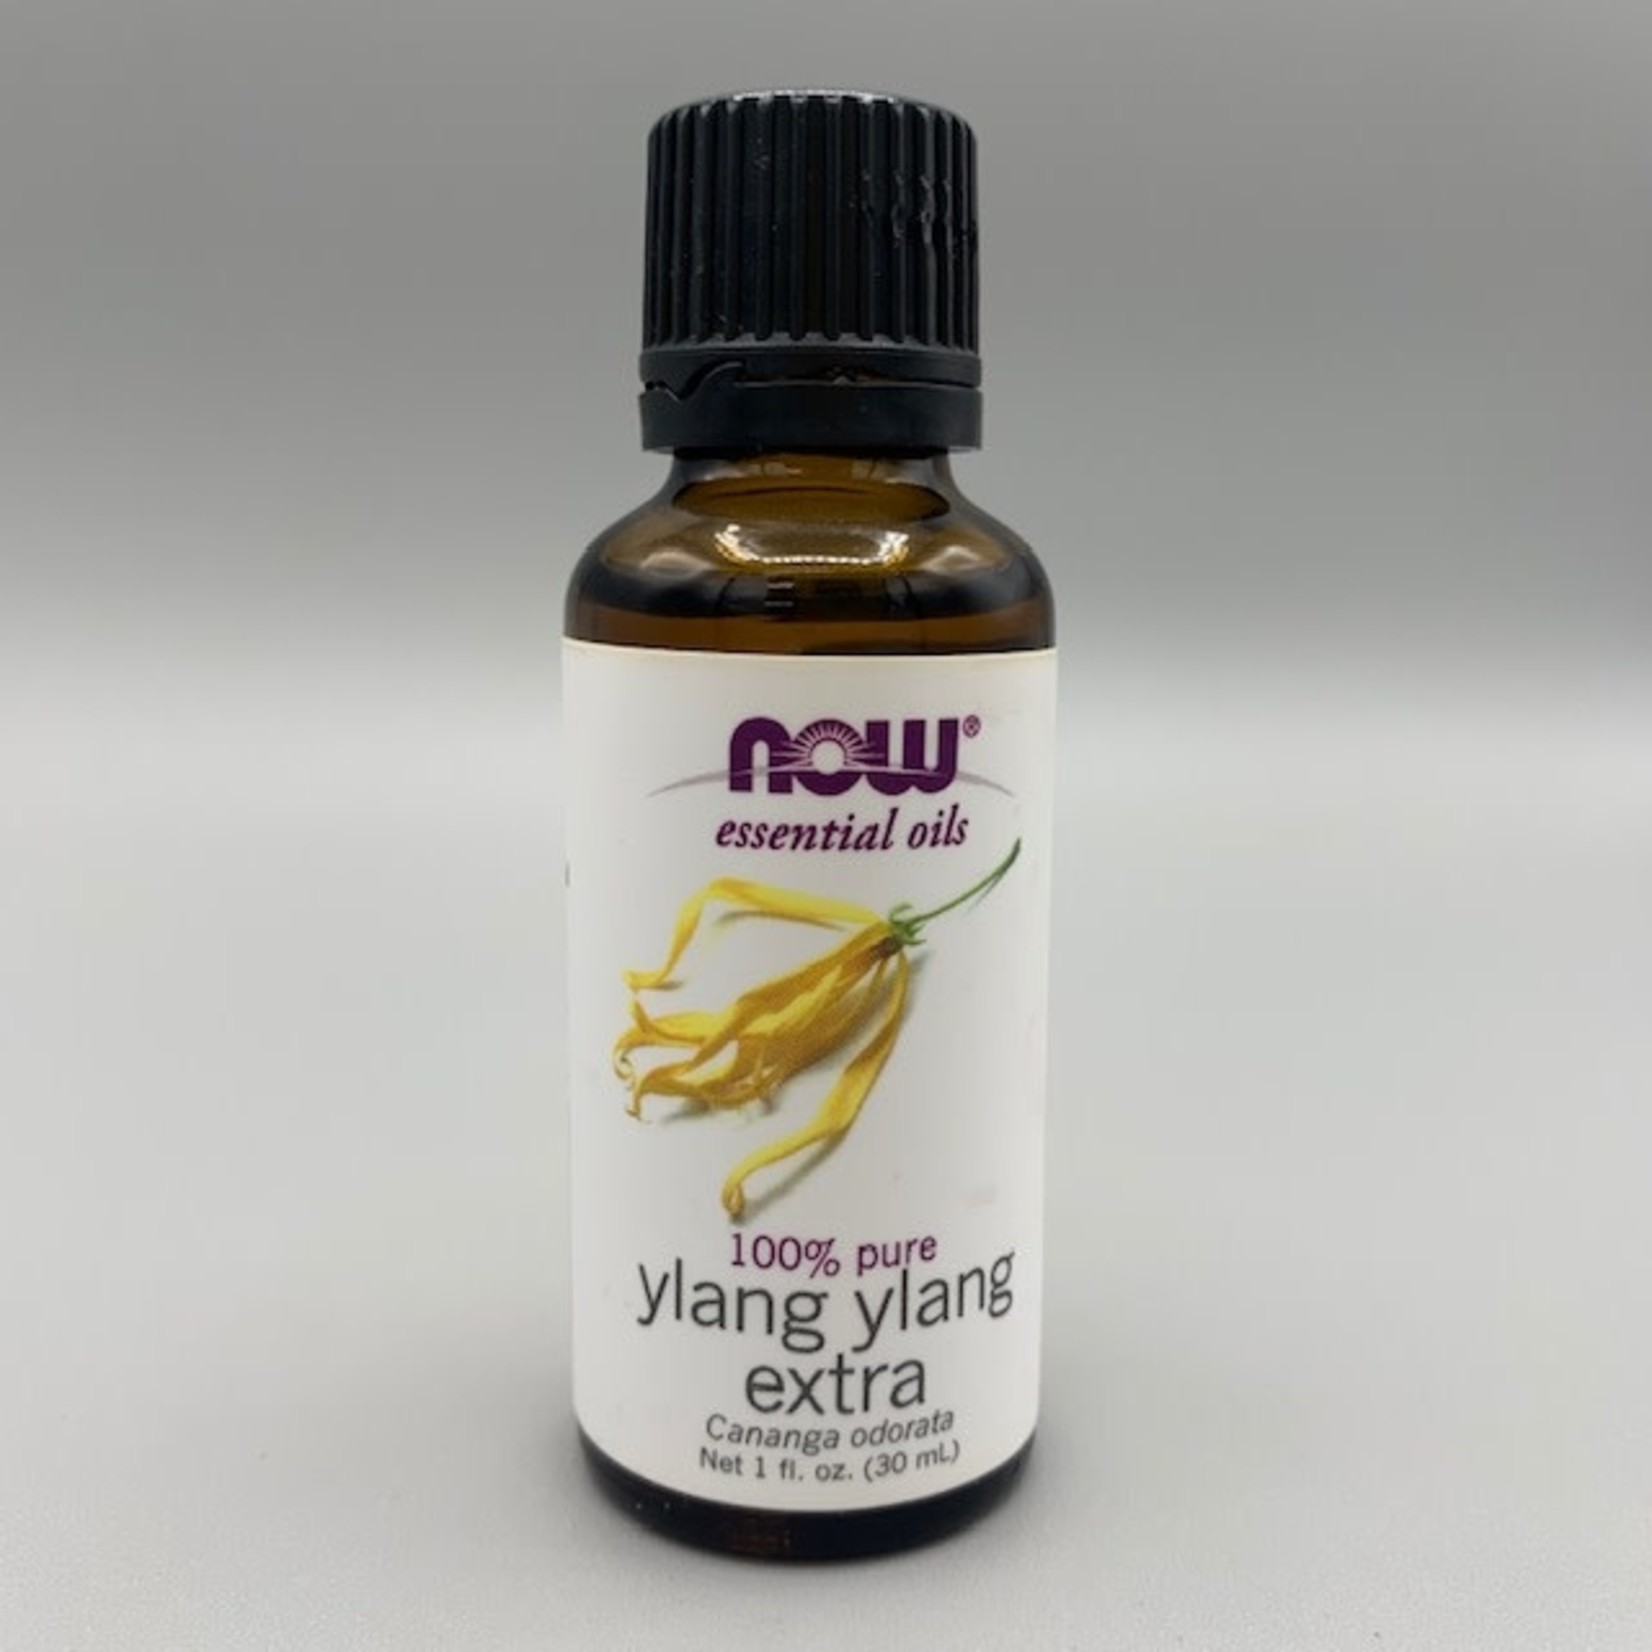 NOW NOW YLANG YLANG ESSENTIAL OIL, 1 OZ